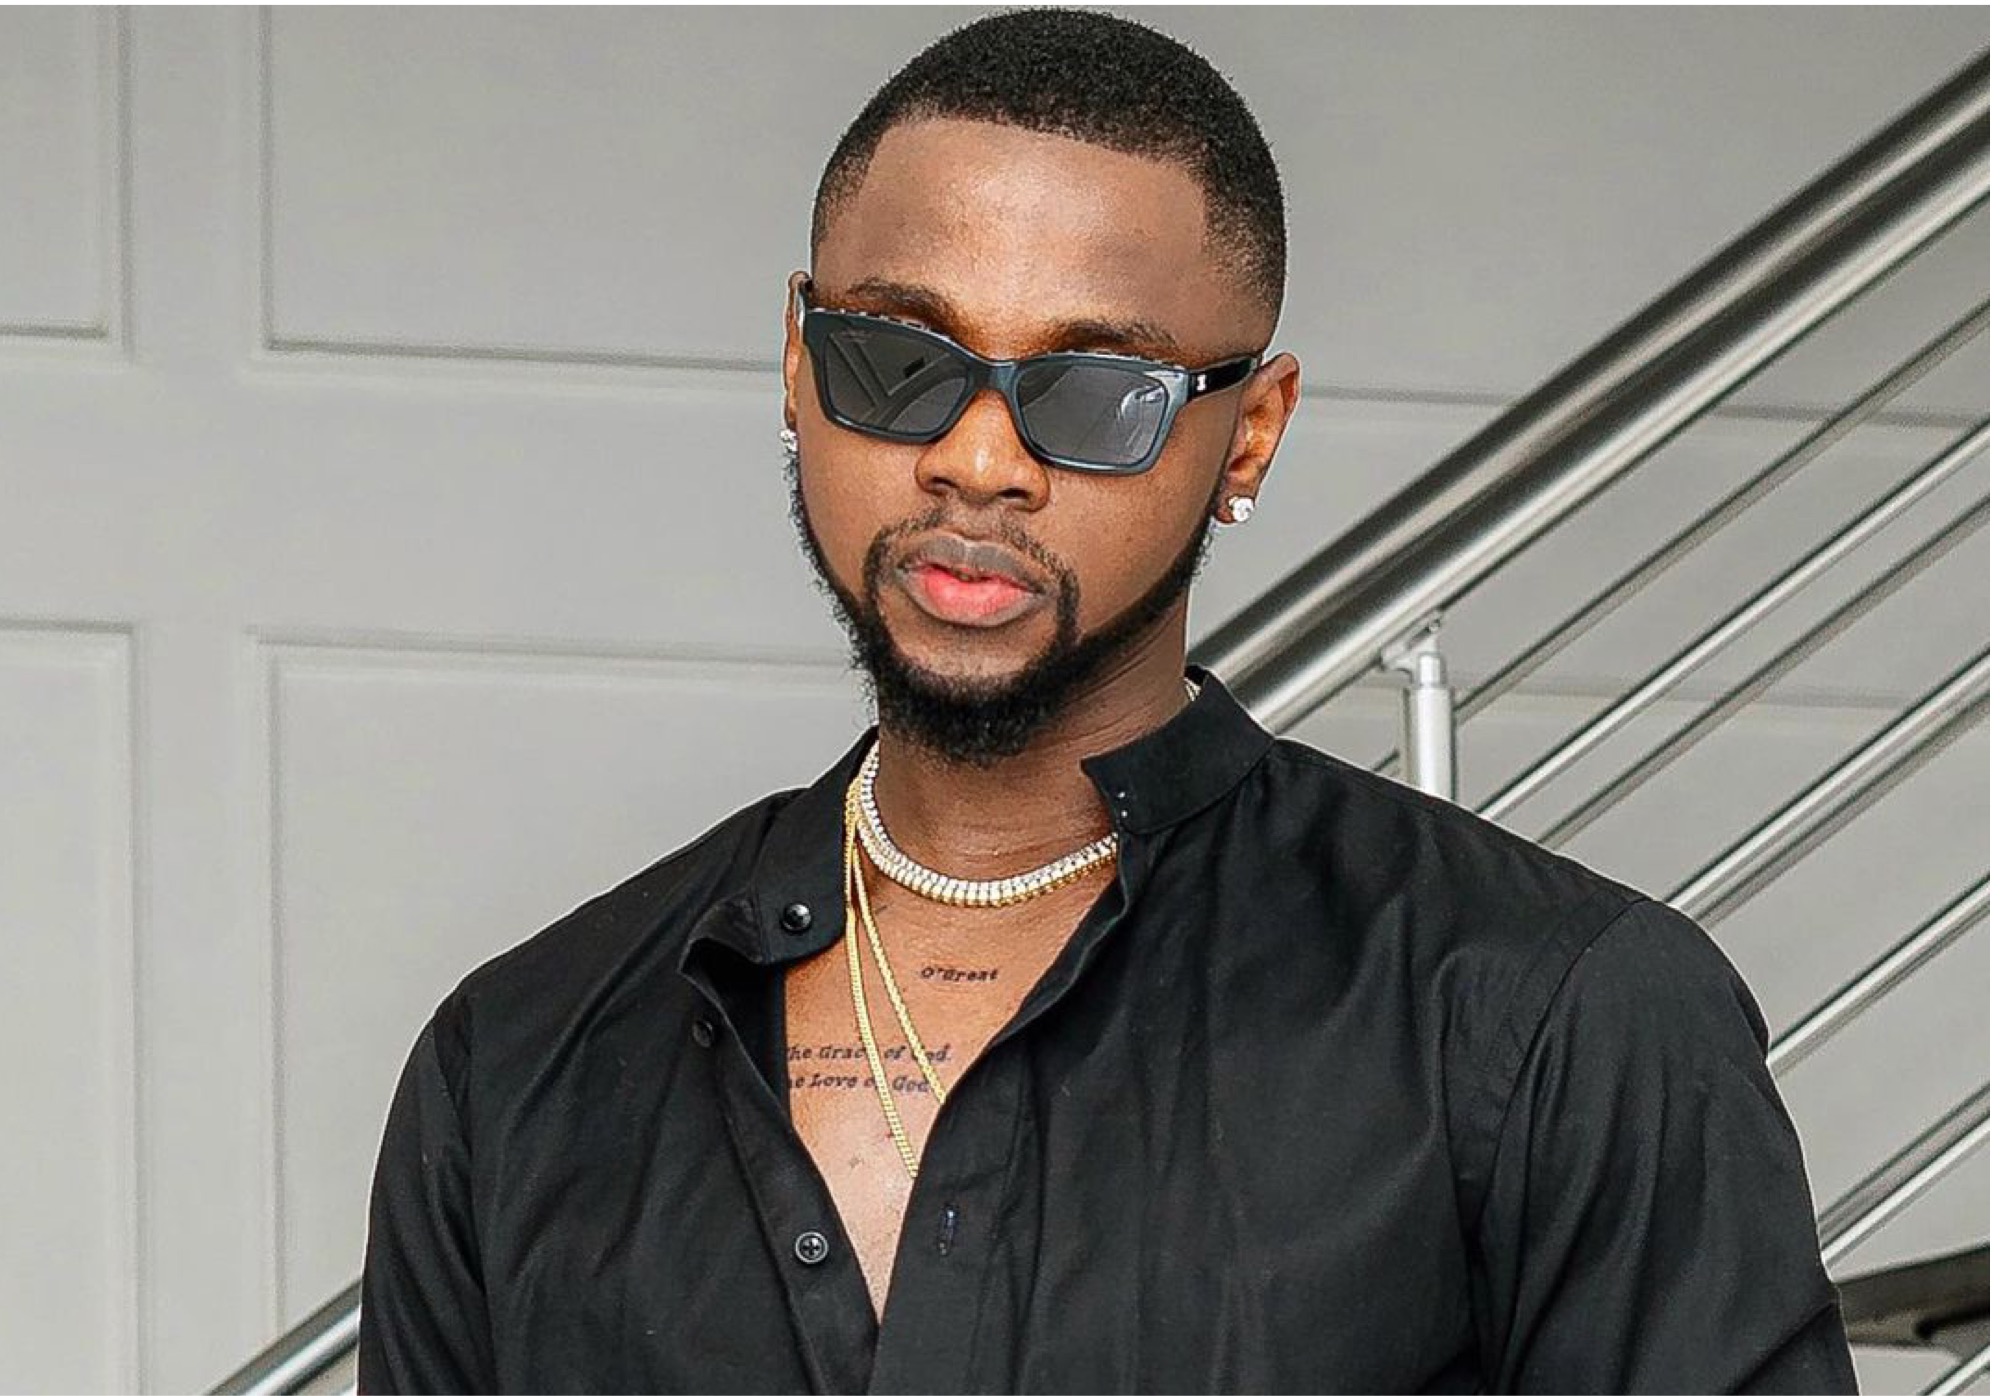 “Couple Of Months Ago, I Couldn’t Even Stand” - Singer Kizz Daniel Reveals